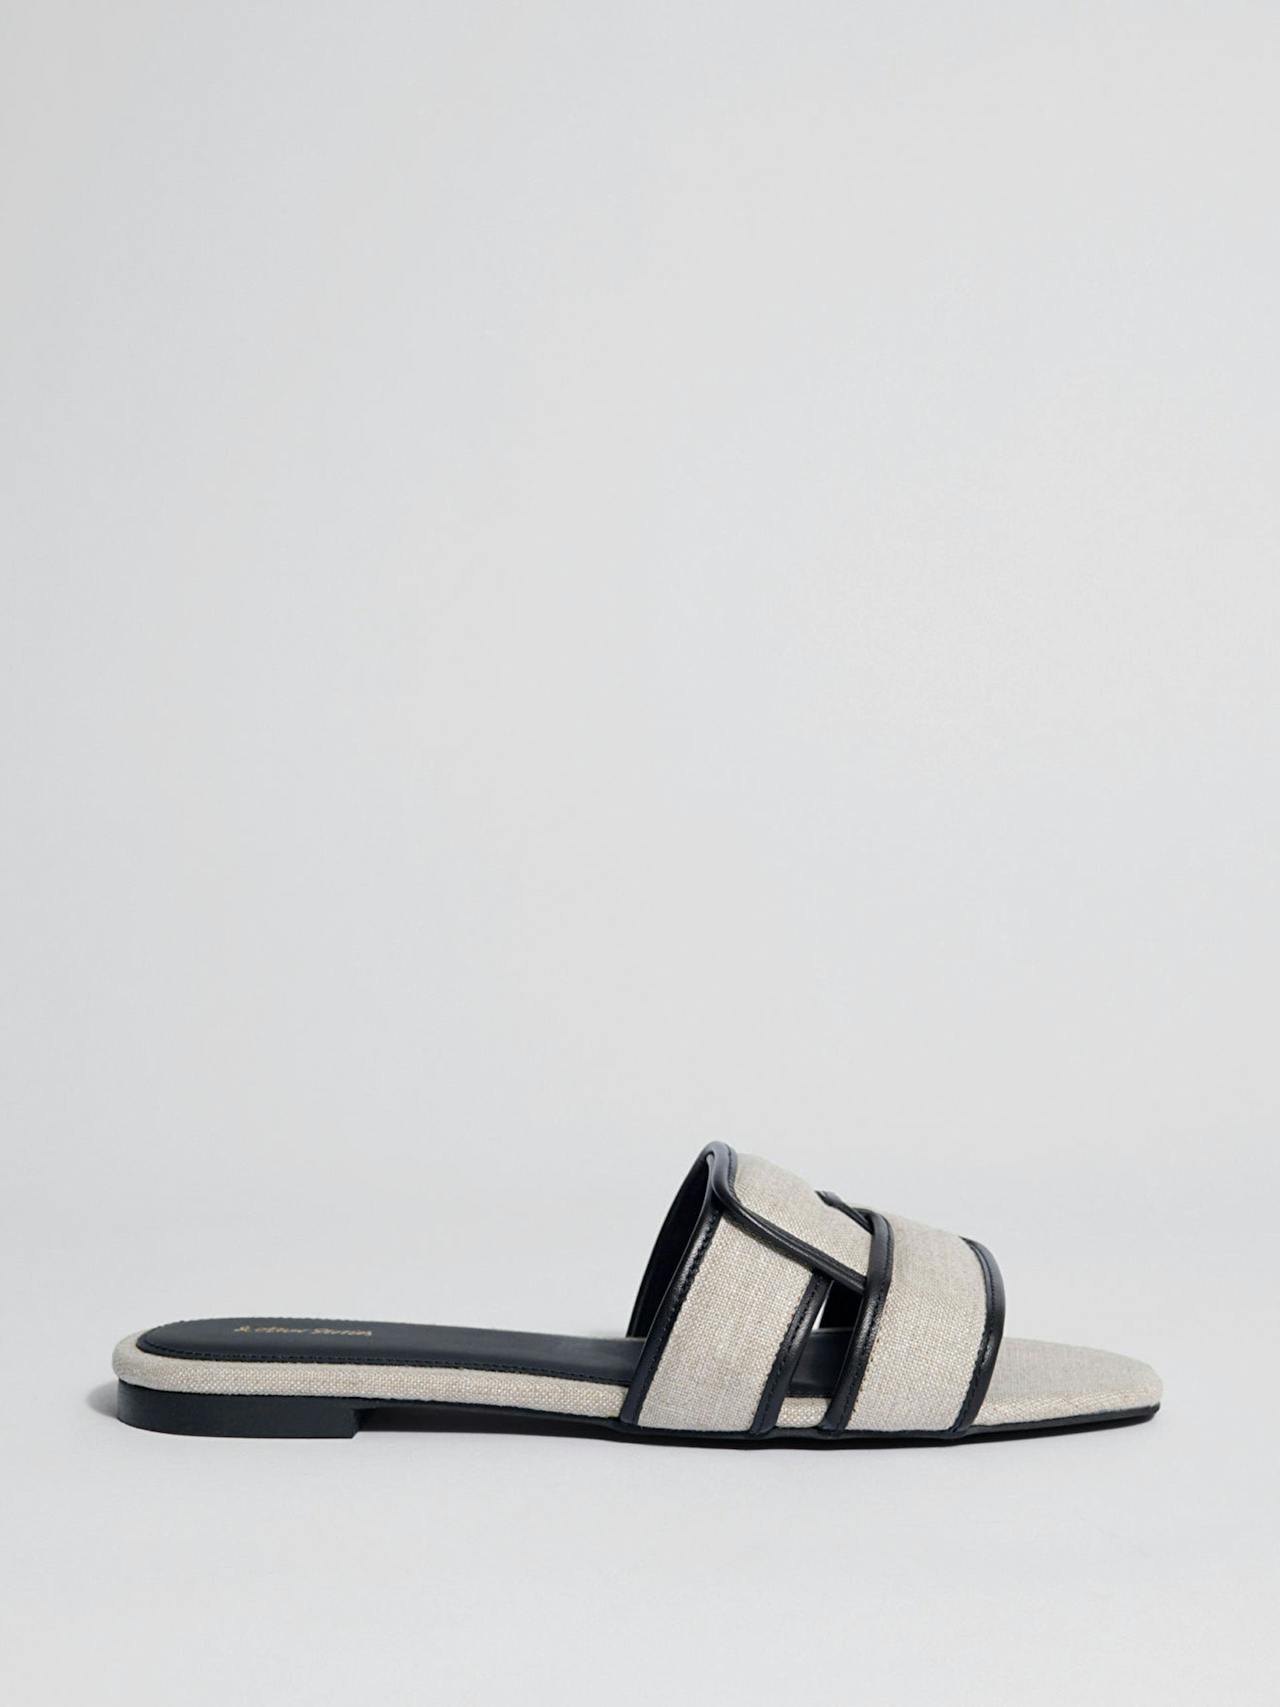 Woven leather slides